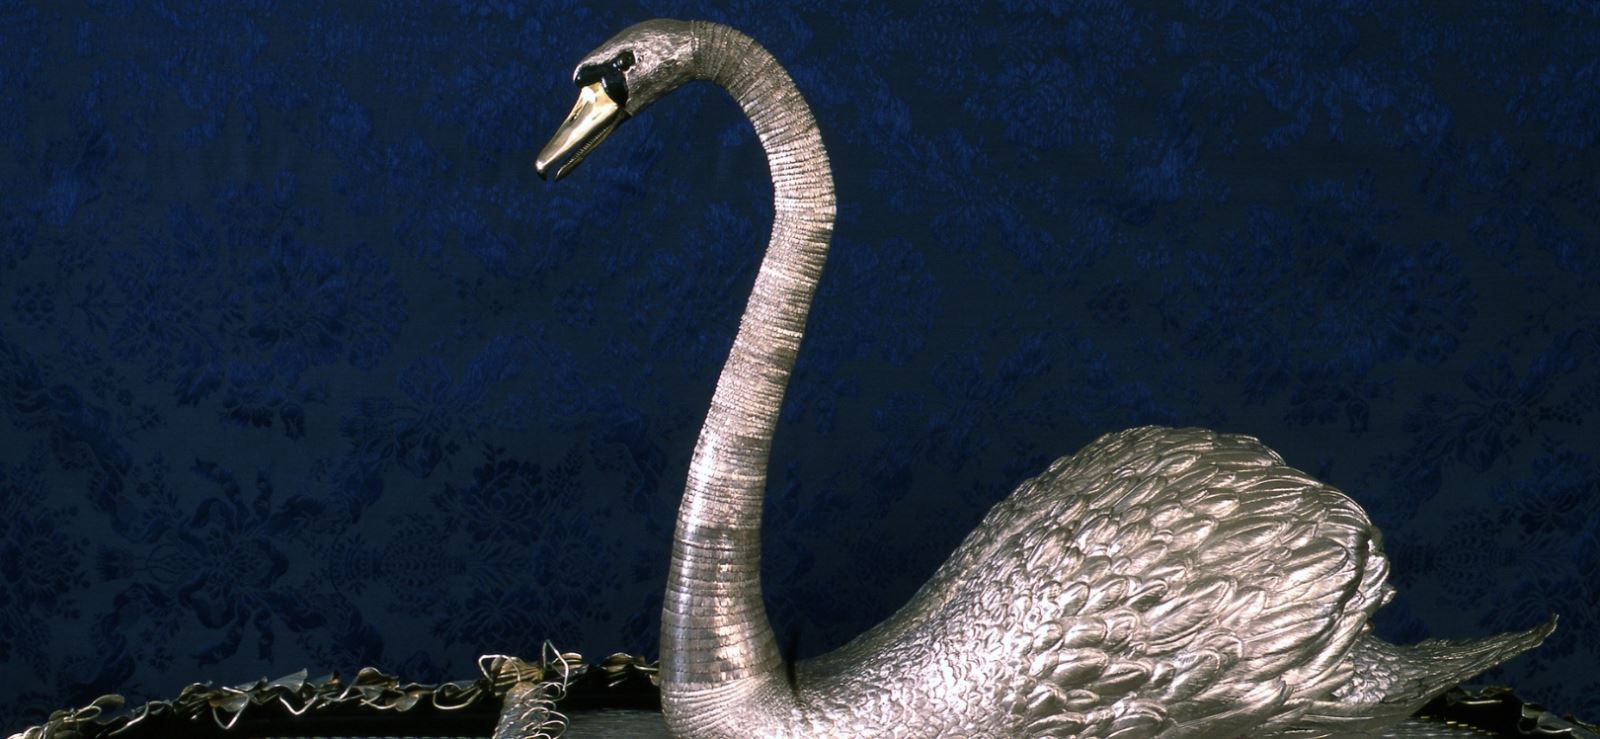 The Silver Swan ©Silver Swan, The Bowes Museum, Barnard Castle